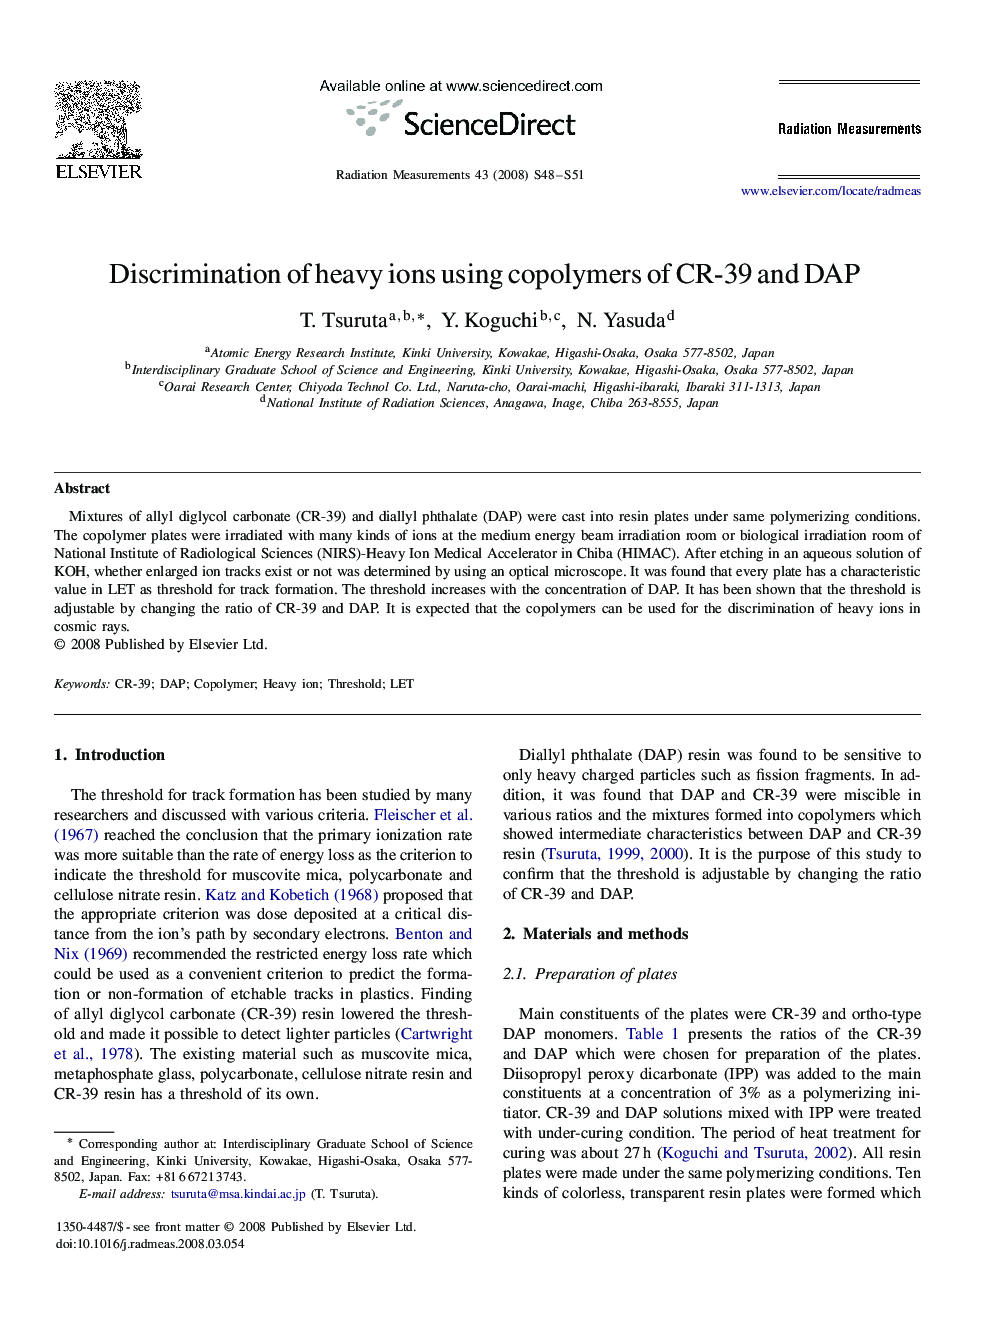 Discrimination of heavy ions using copolymers of CR-39 and DAP